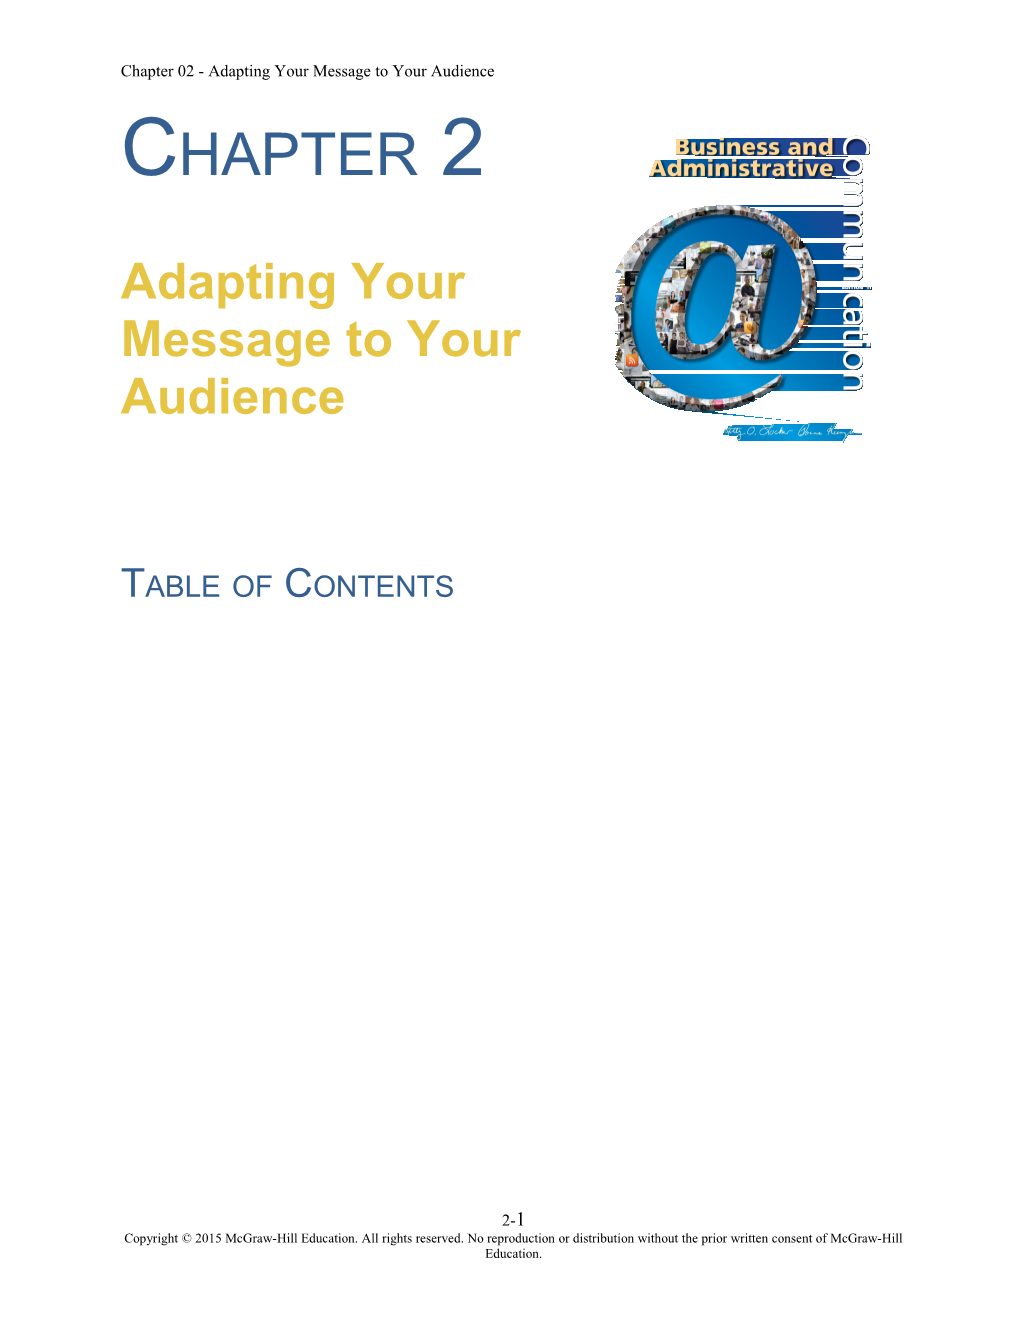 Chapter02 - Adapting Your Message to Your Audience